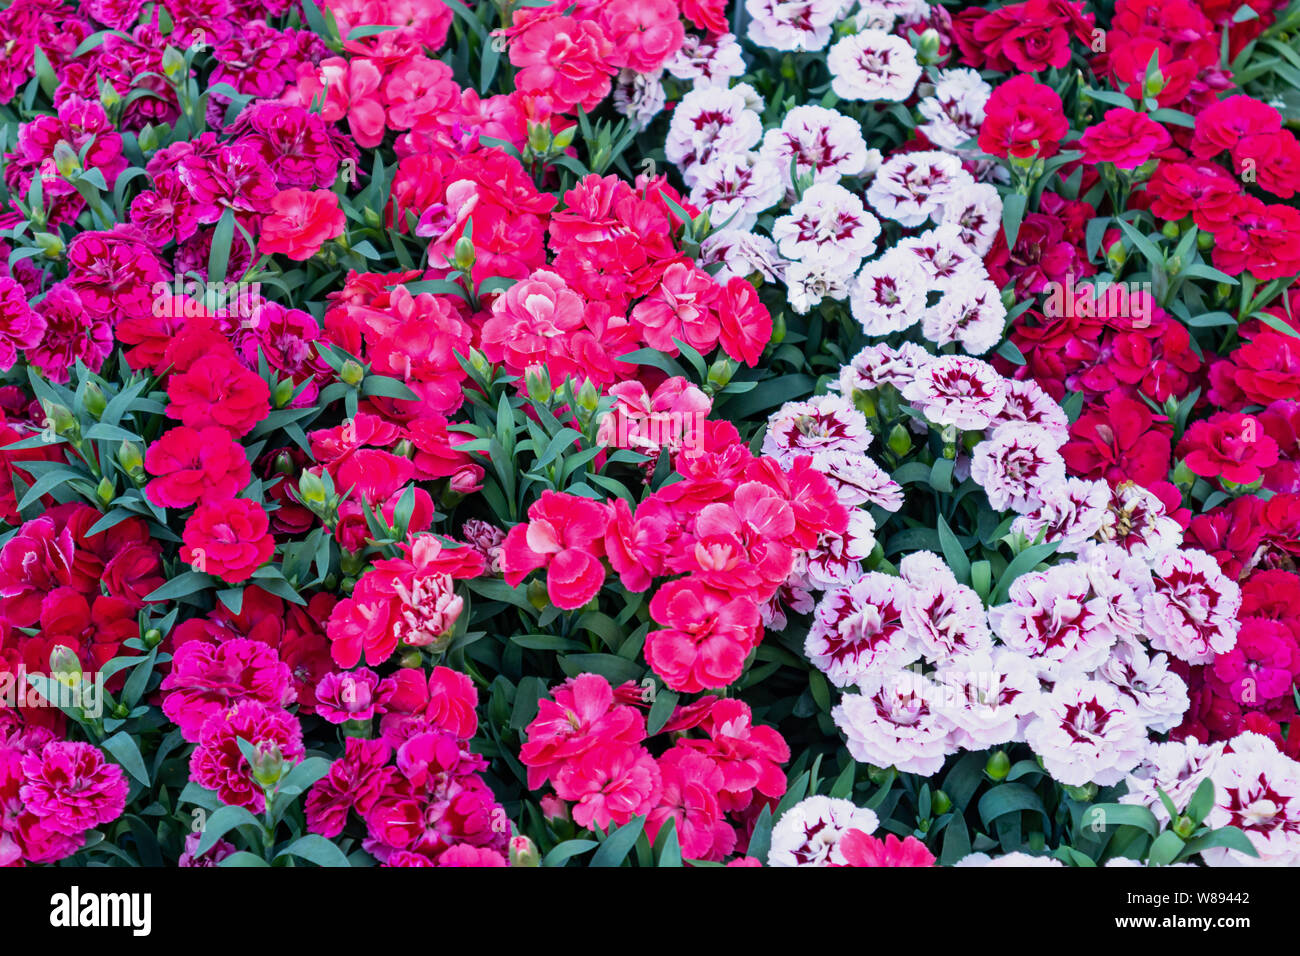 Carnations summer flowers background. Bright color blossoms for sale in an open air market, Rotterdam Netherlands. Full background texture Stock Photo